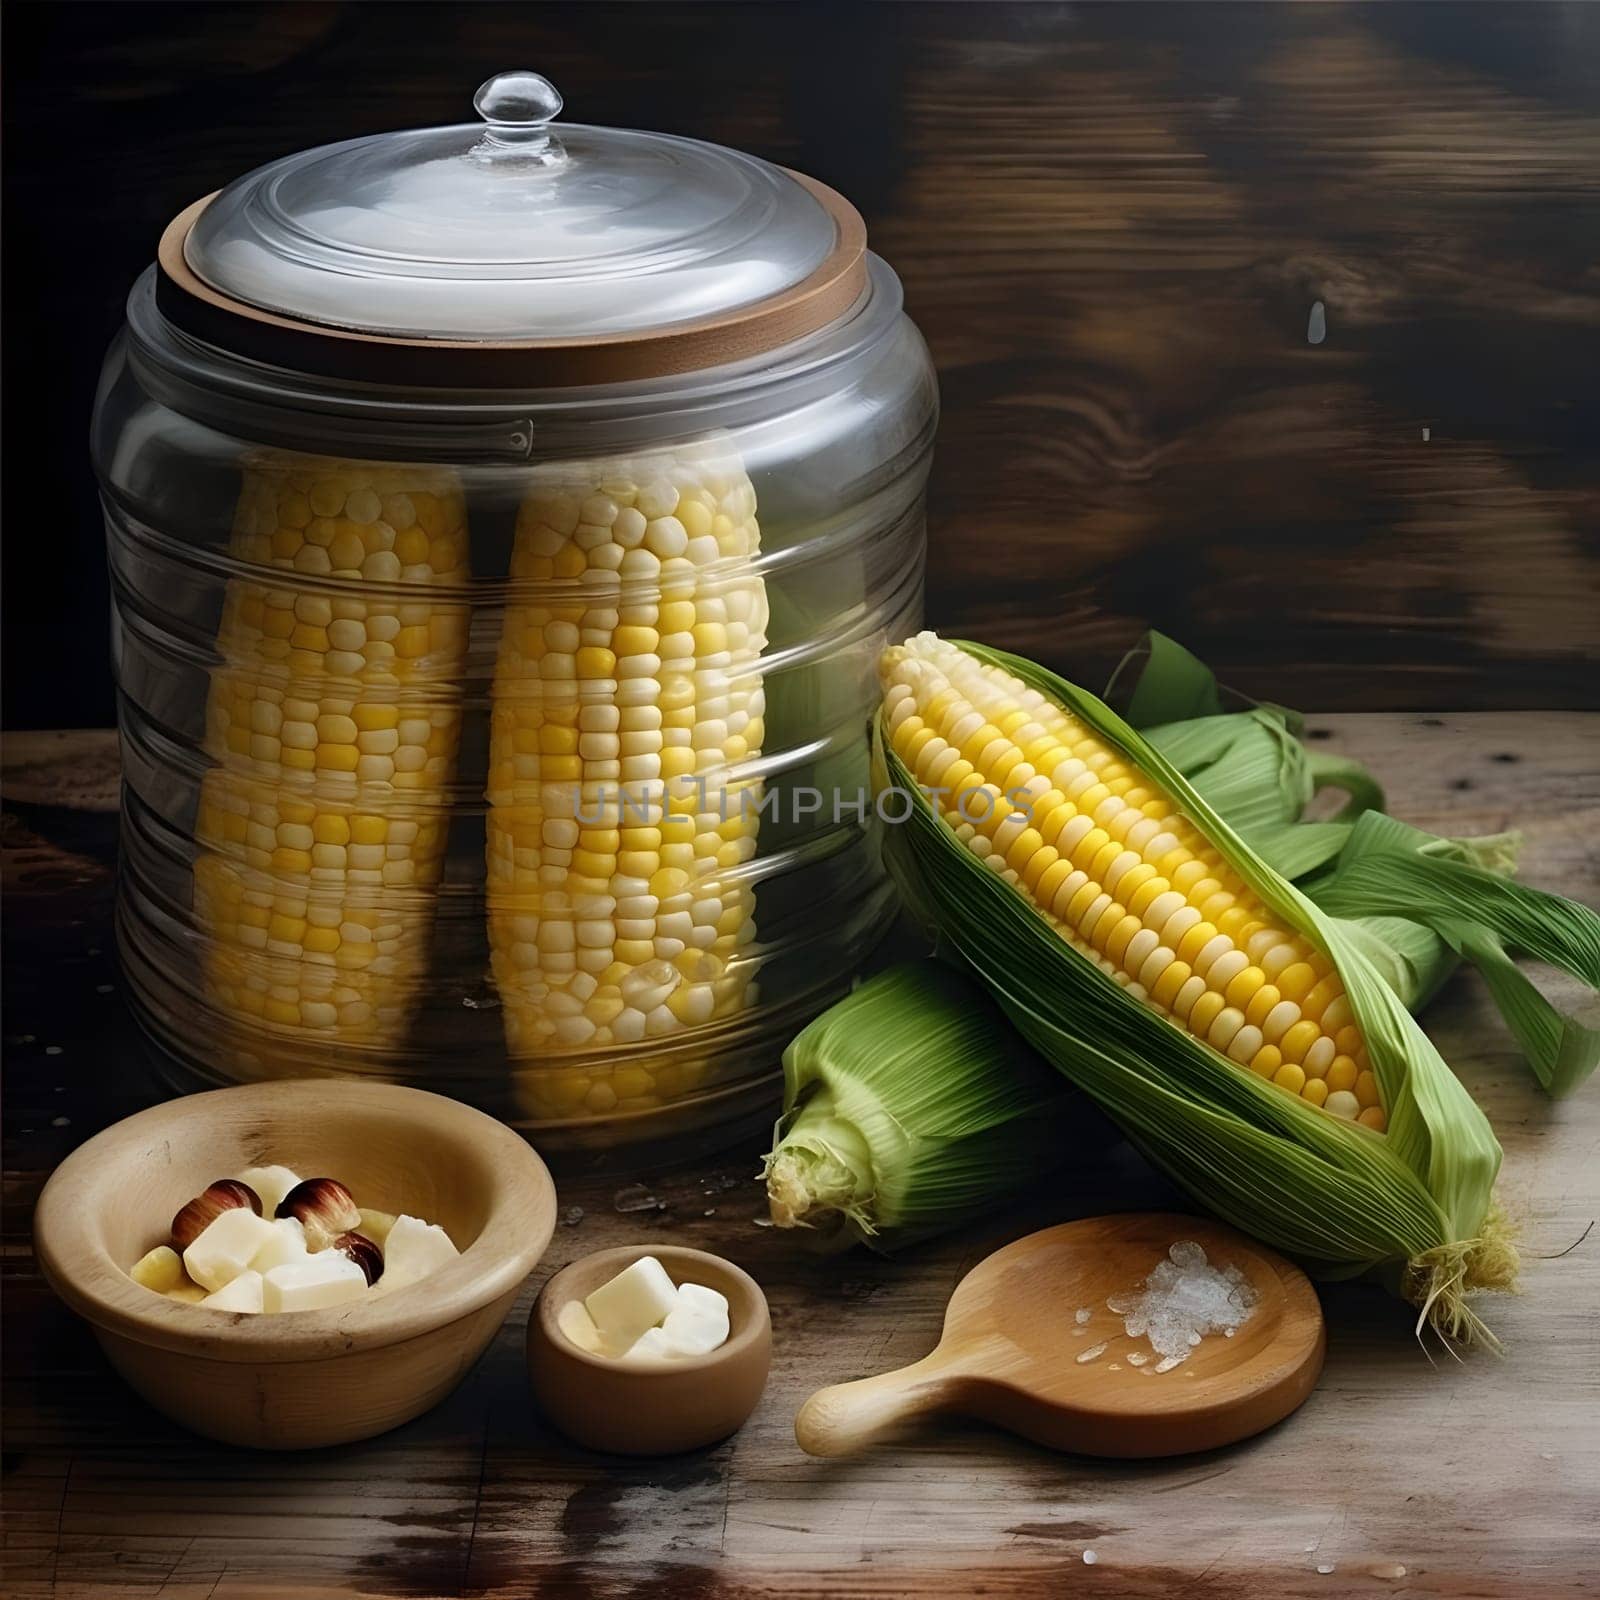 Corn cobs in a glass container on a wooden countertop. Corn as a dish of thanksgiving for the harvest. An atmosphere of joy and celebration.